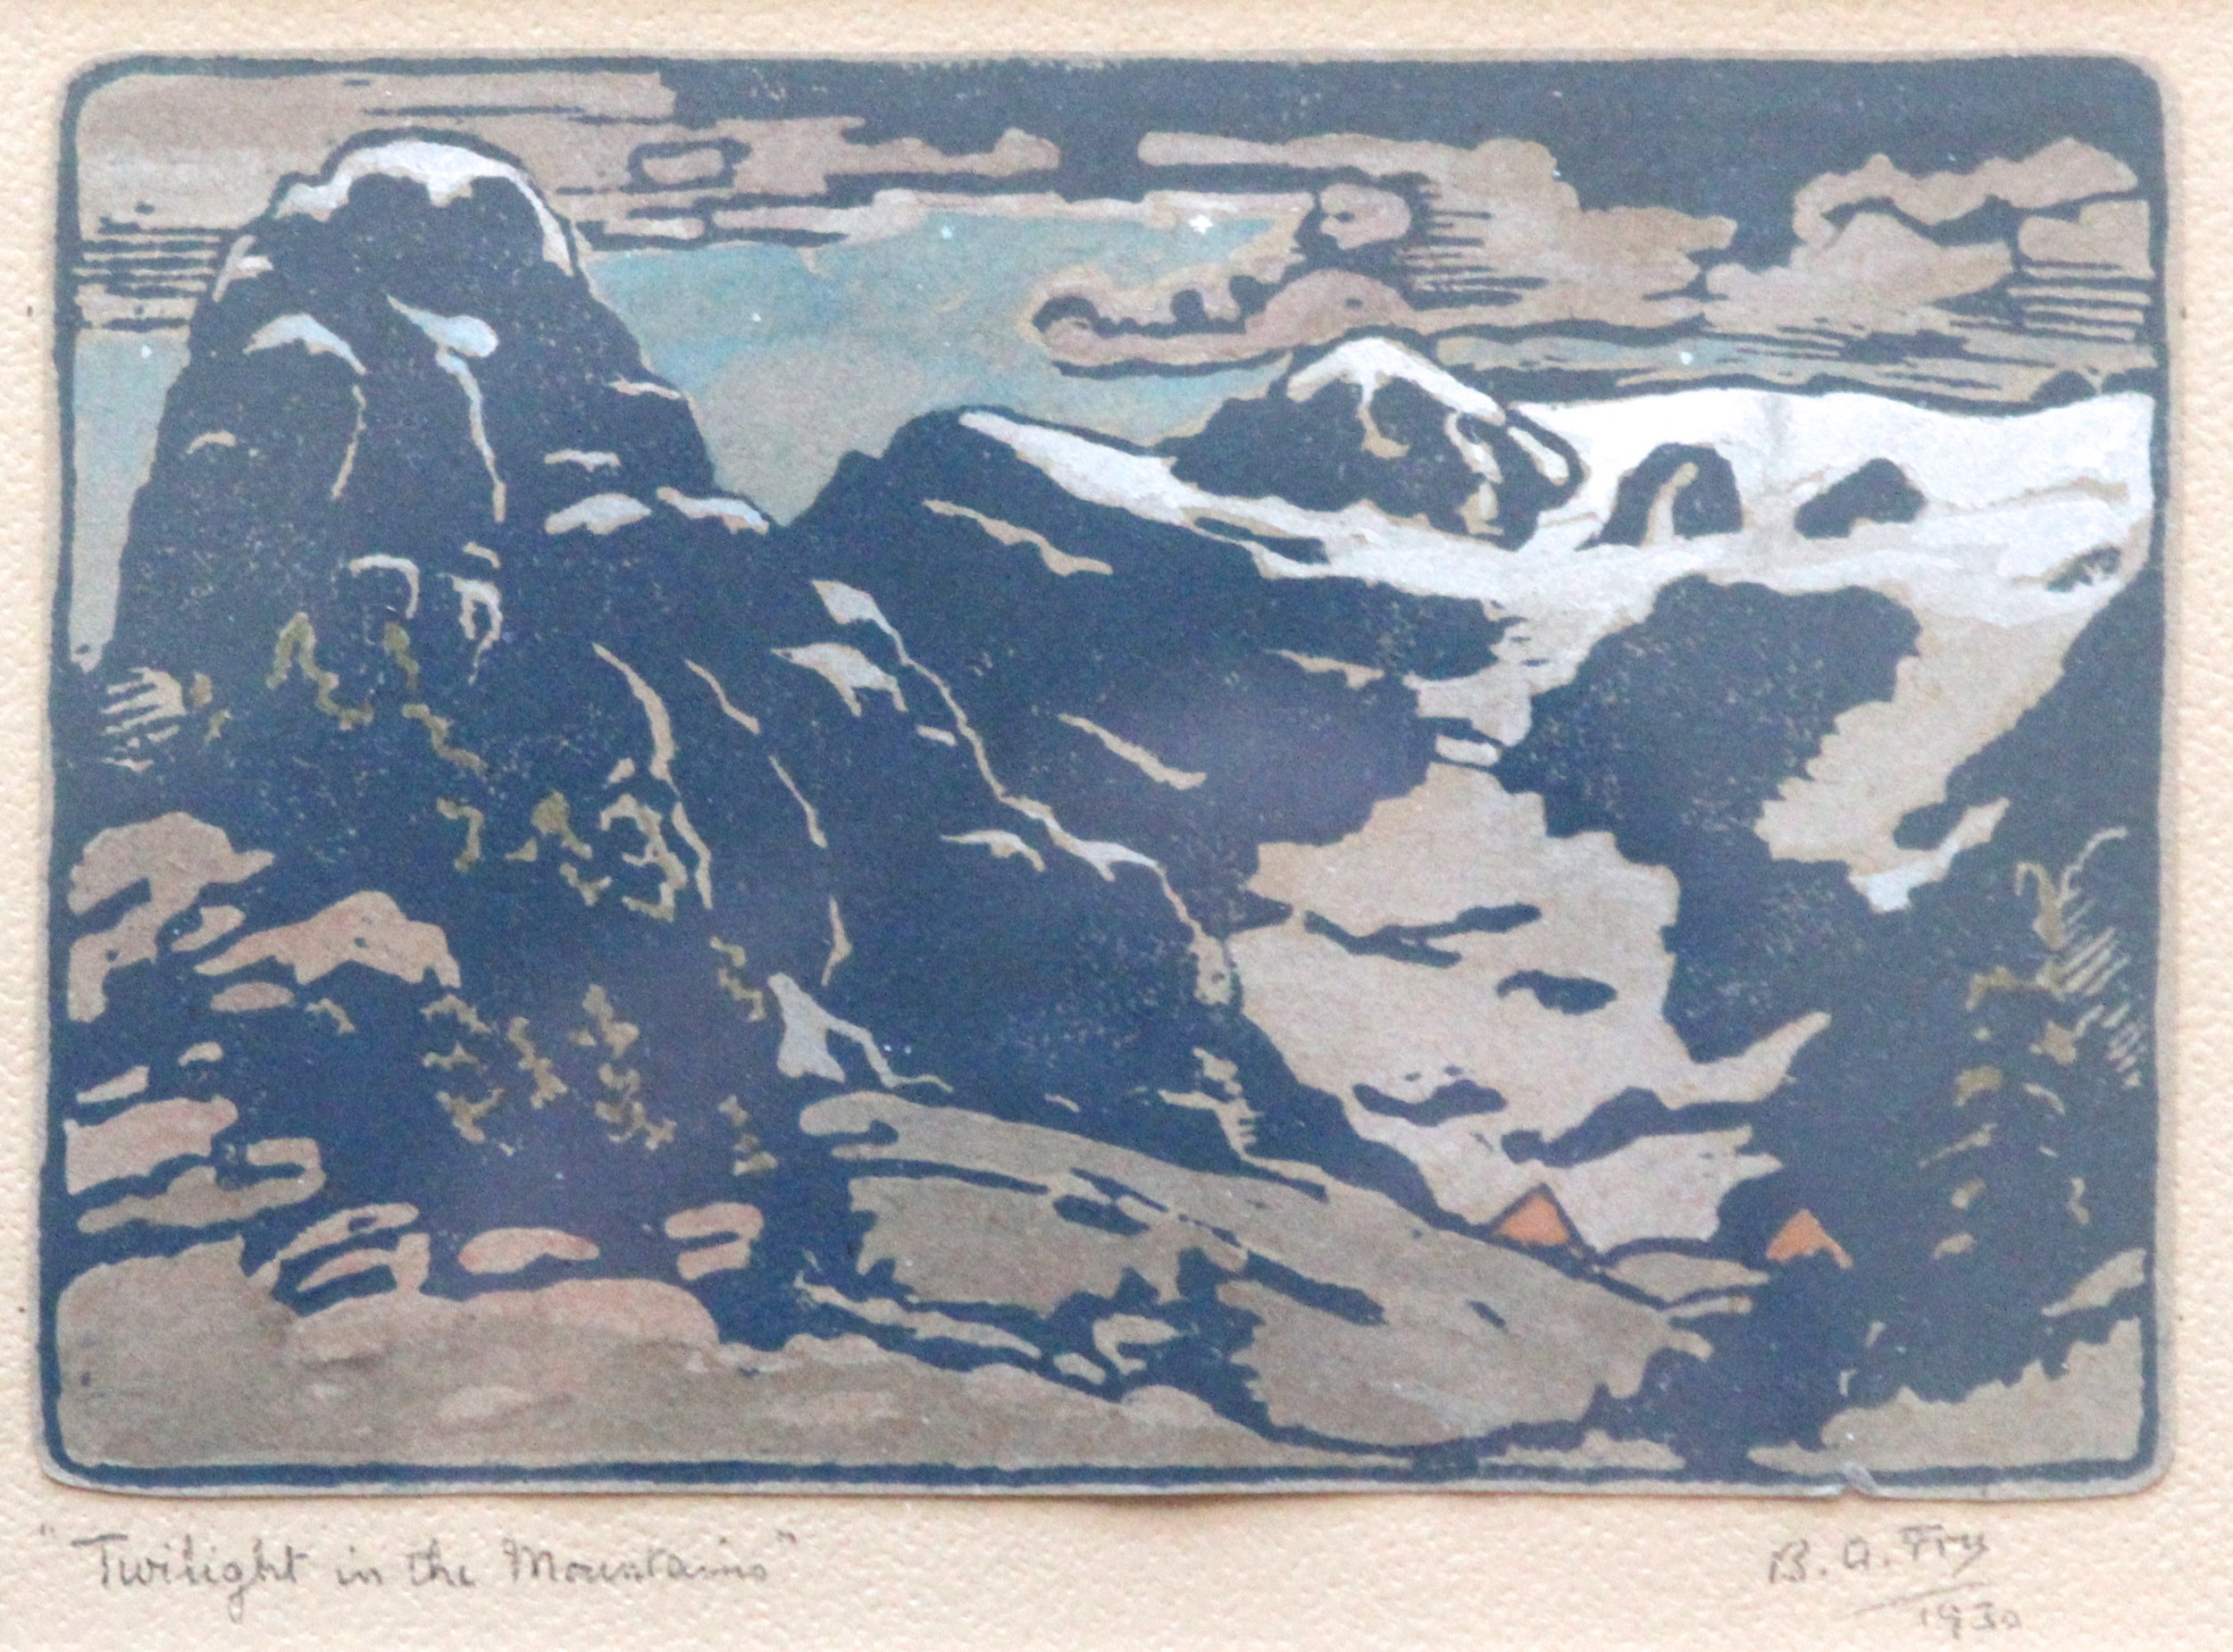 Bessie Adelaide Fry, Twilight in the Mountains, 1930